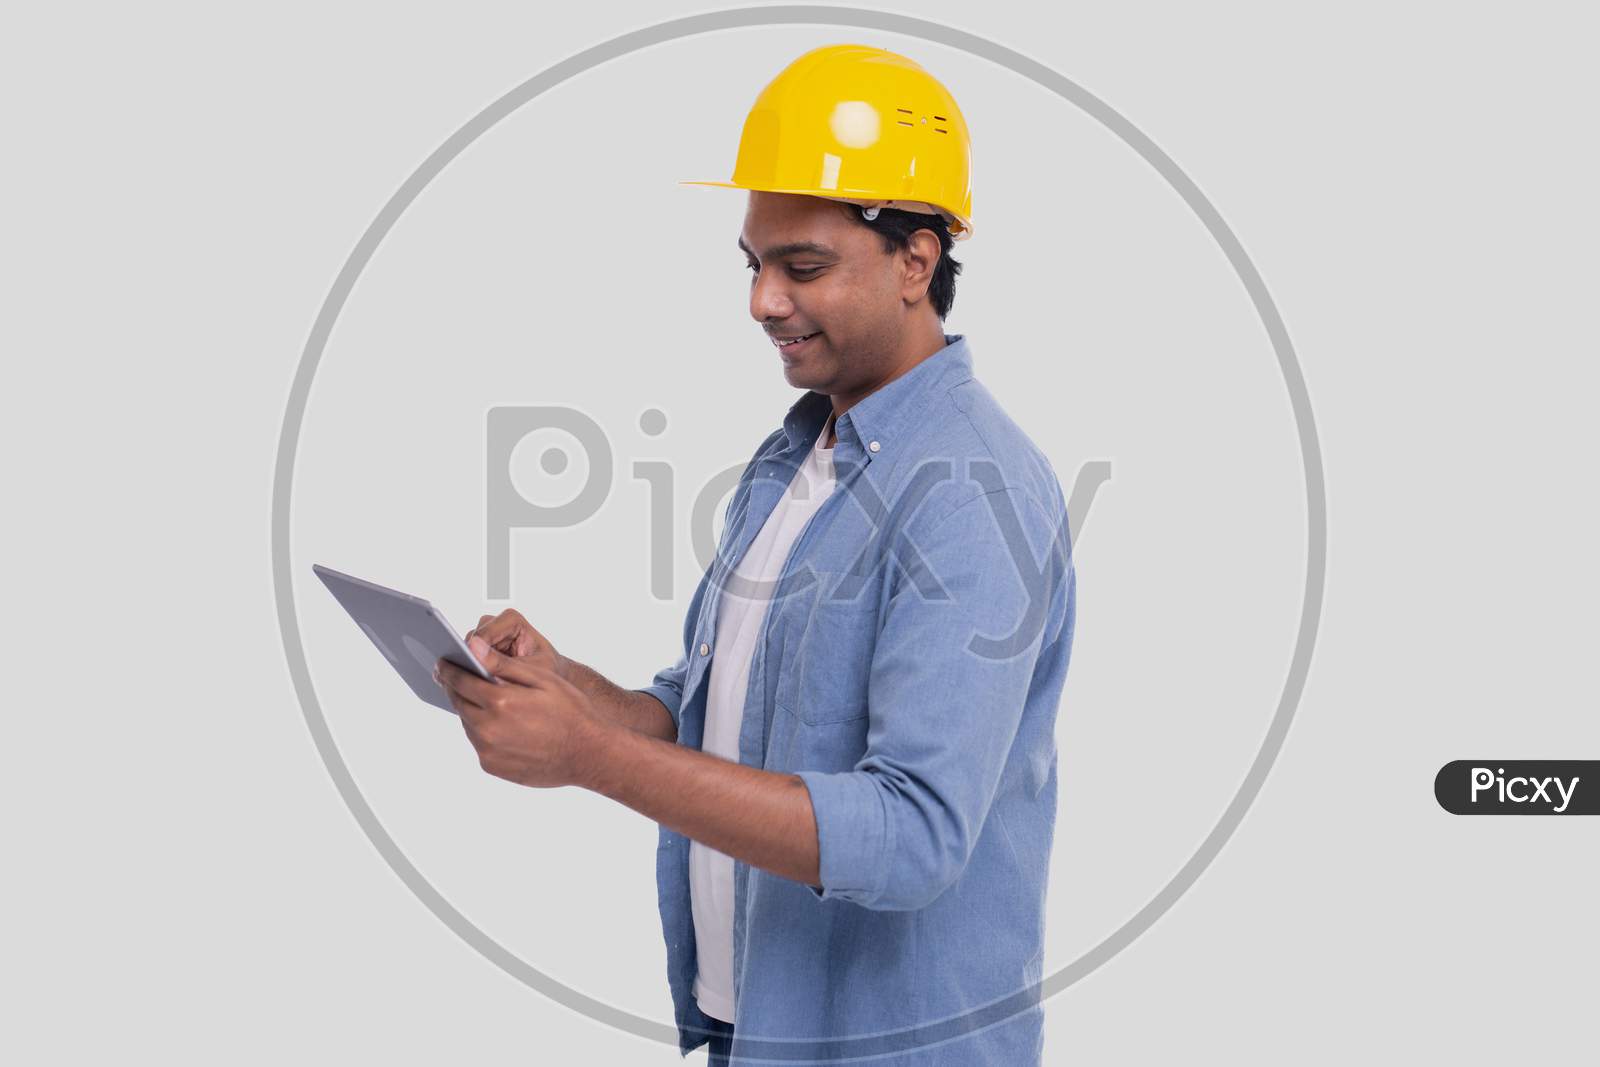 Construction Worker Holding Tablet In Hands. Man Using Tablet. Architect Holding Tablet. Yellow Hard Helmet. Worker Isolated